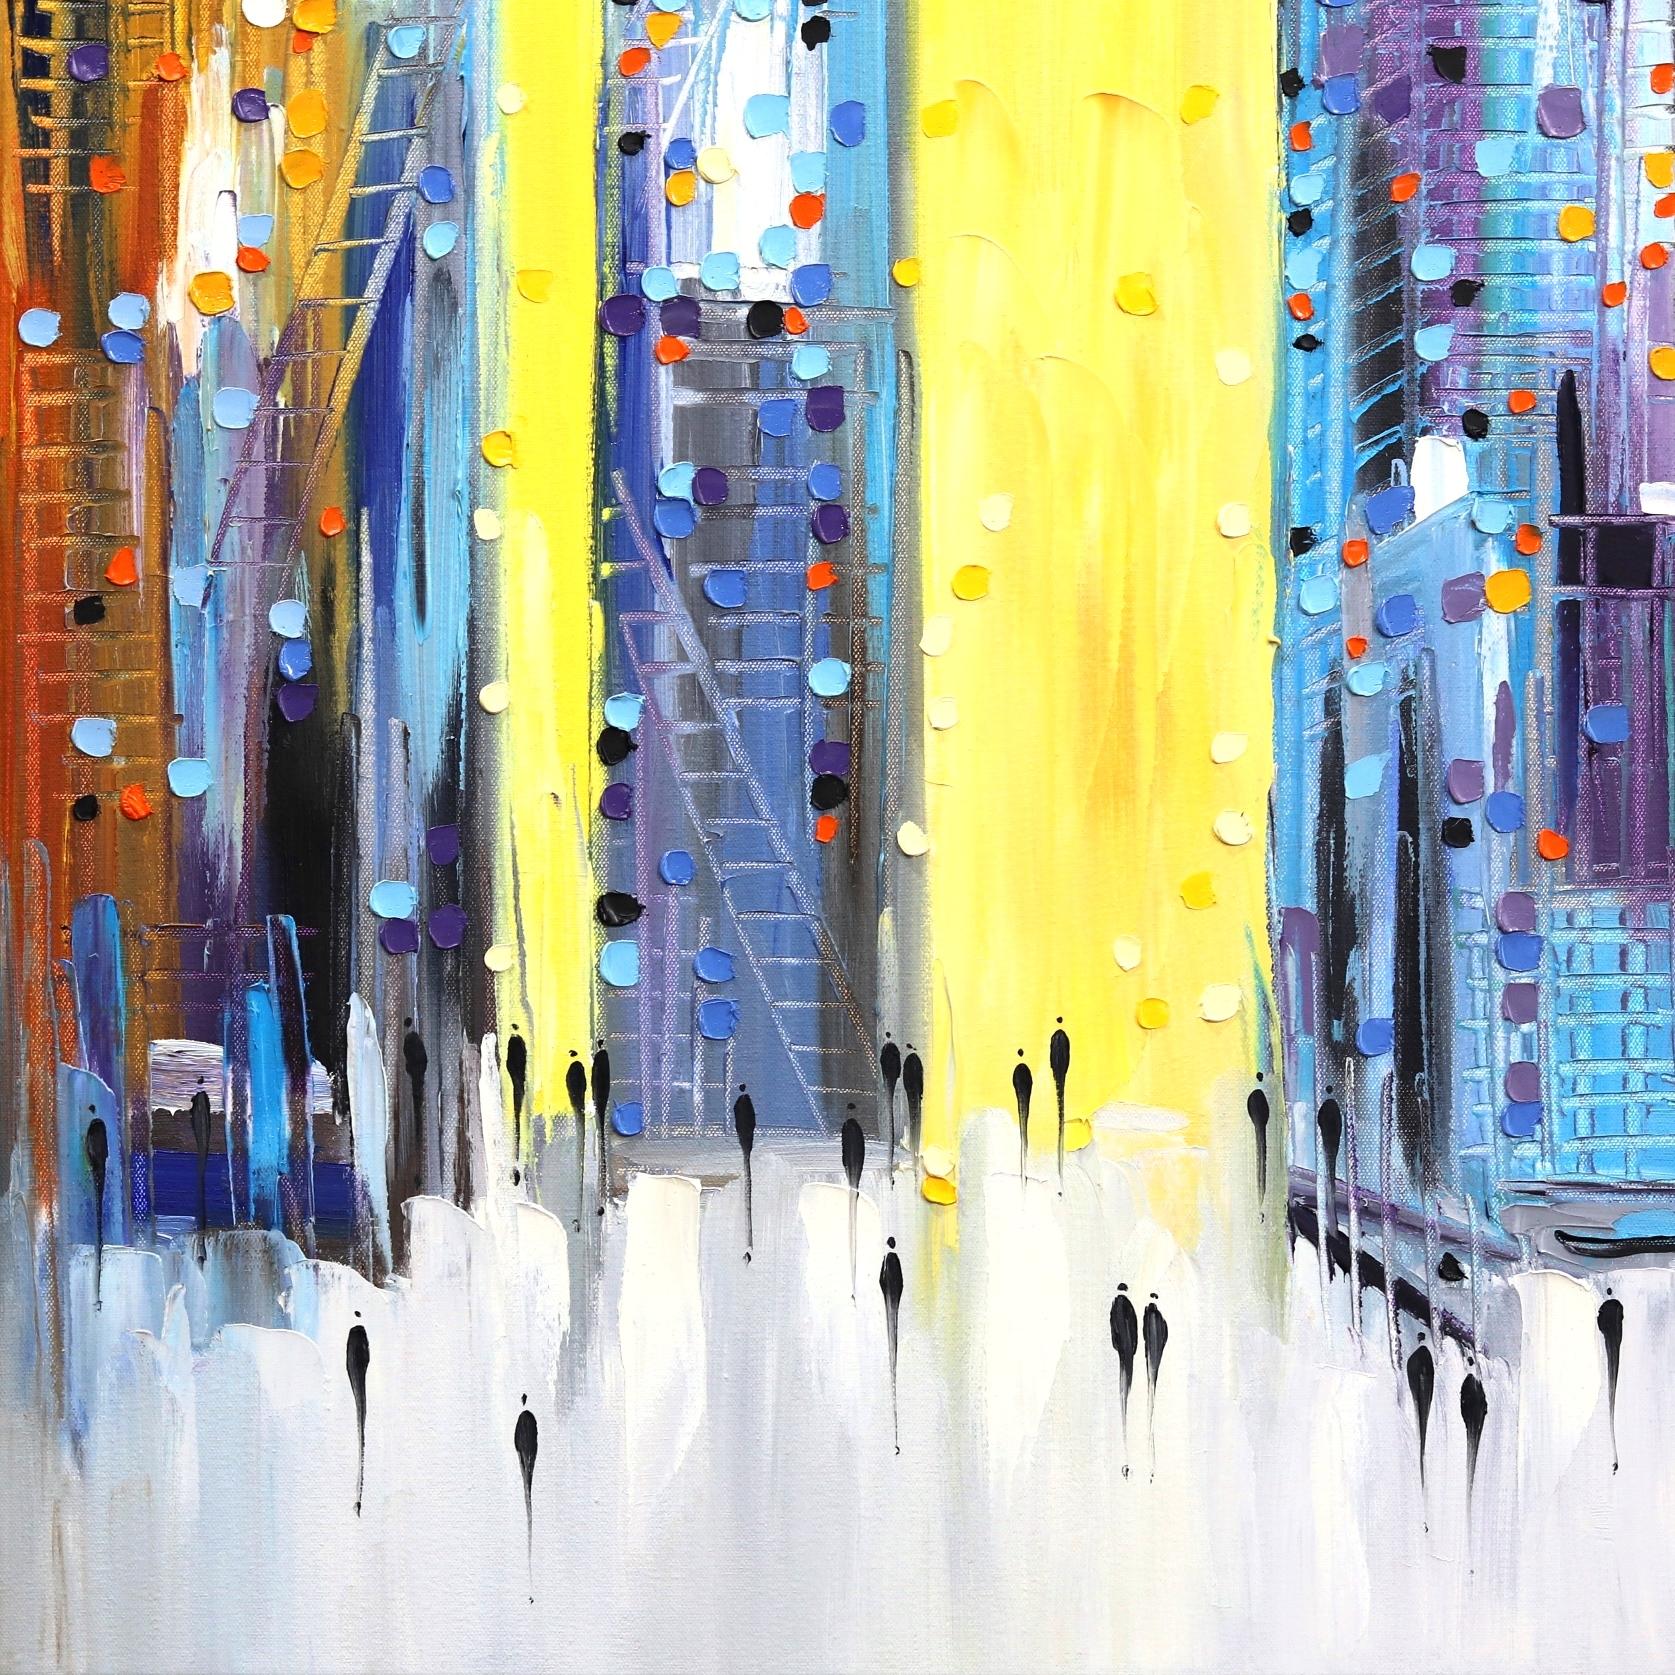 Cosmopolitan City  - Colorful Textural Original Oil Painting on Canvas 1